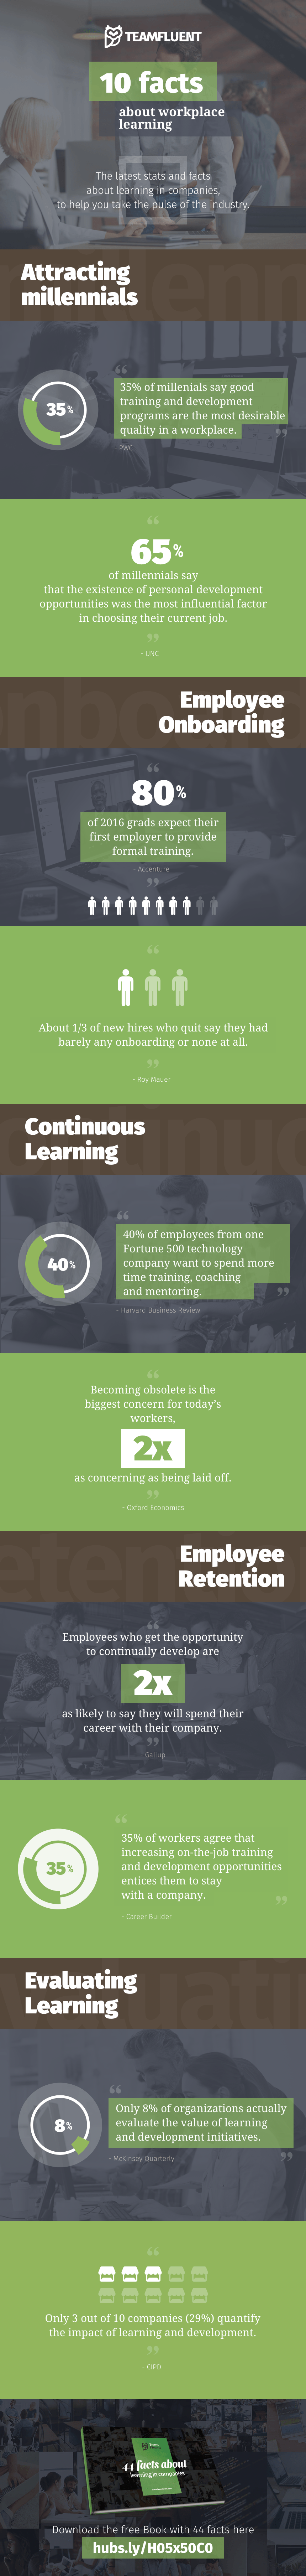 10 Interesting Workplace Learning Facts Infogr